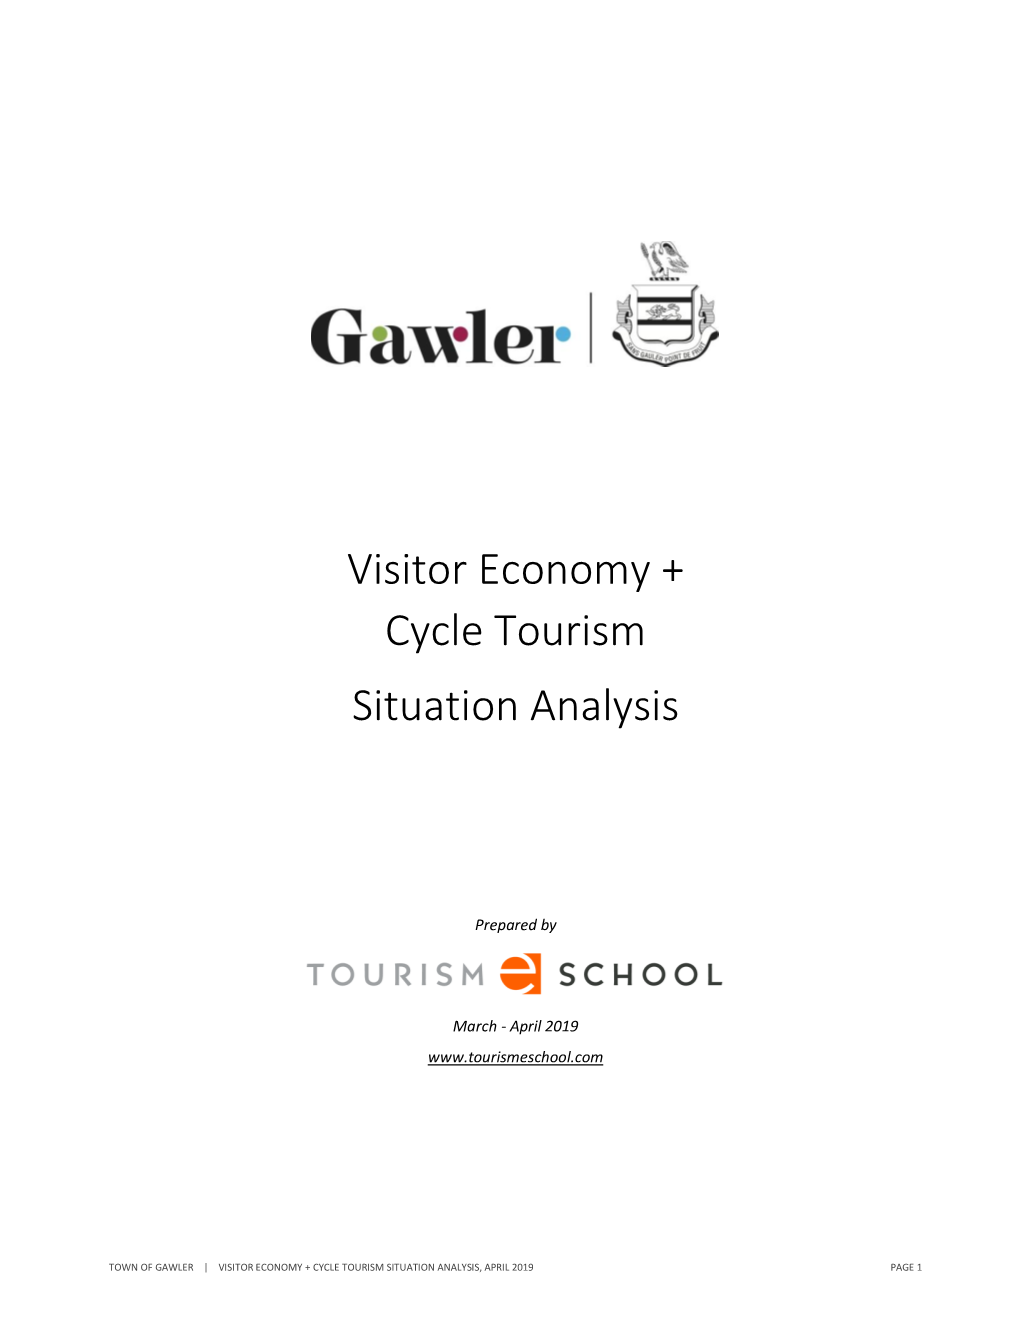 Visitor Economy + Cycle Tourism Situation Analysis